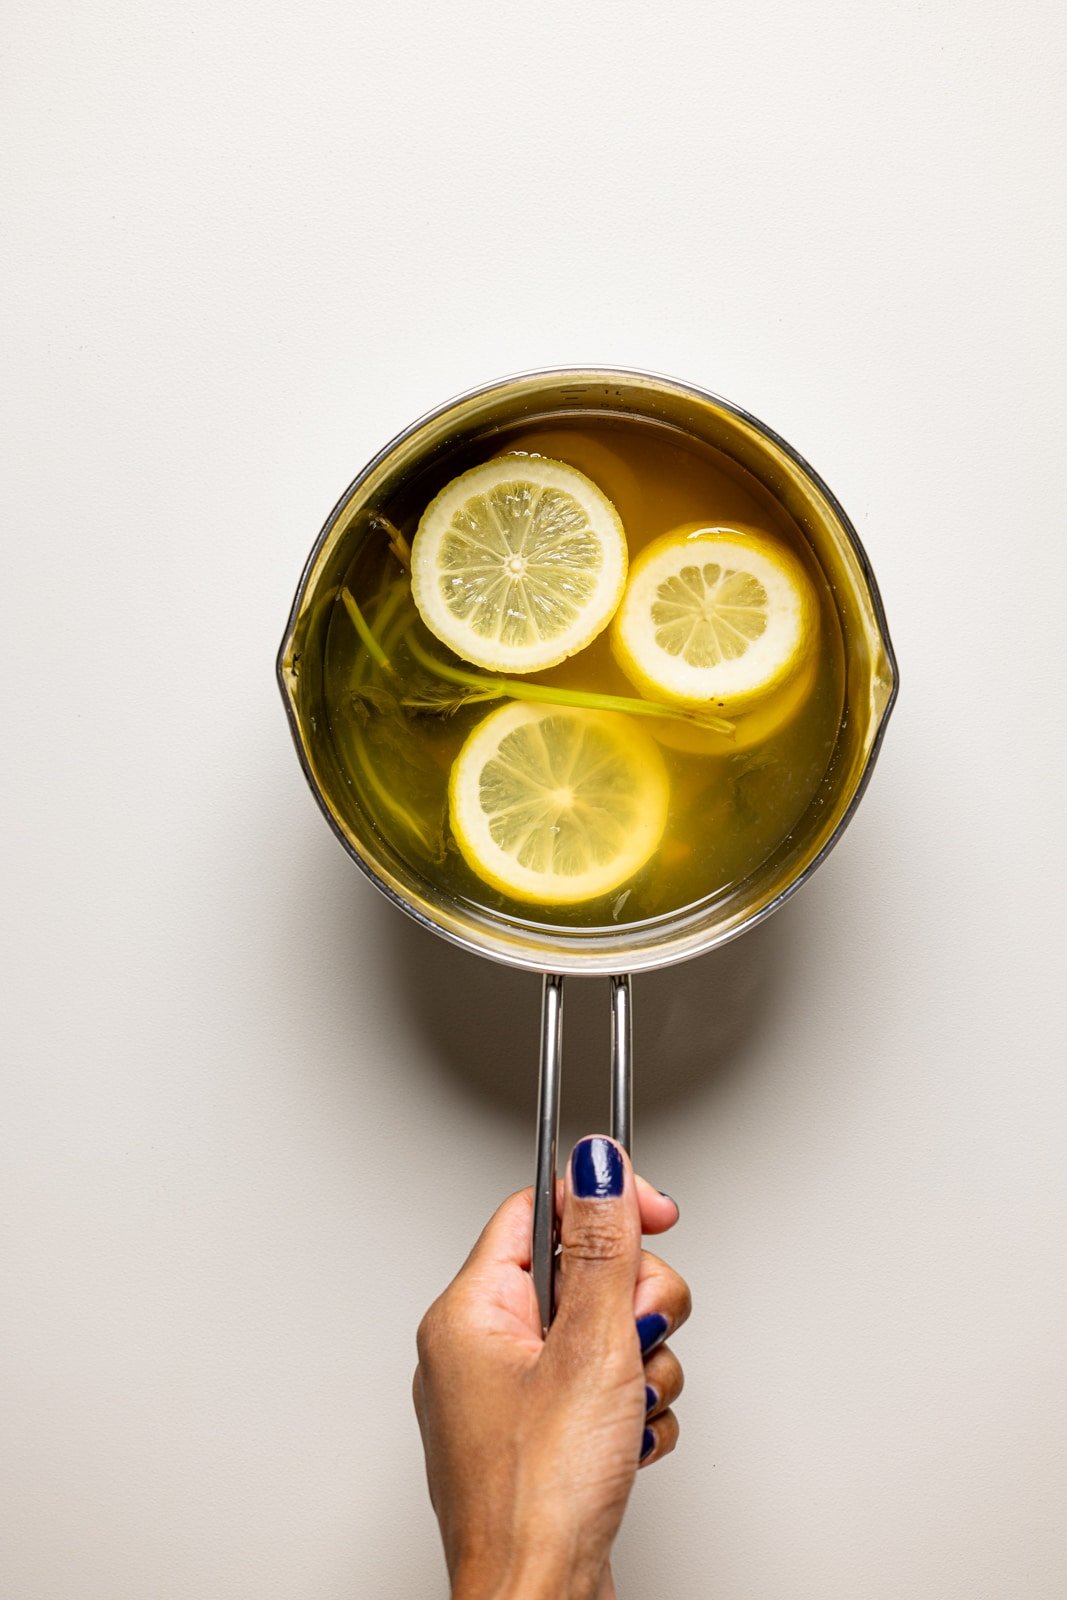 Lemon syrup in a saucepan on a light brown table being held.